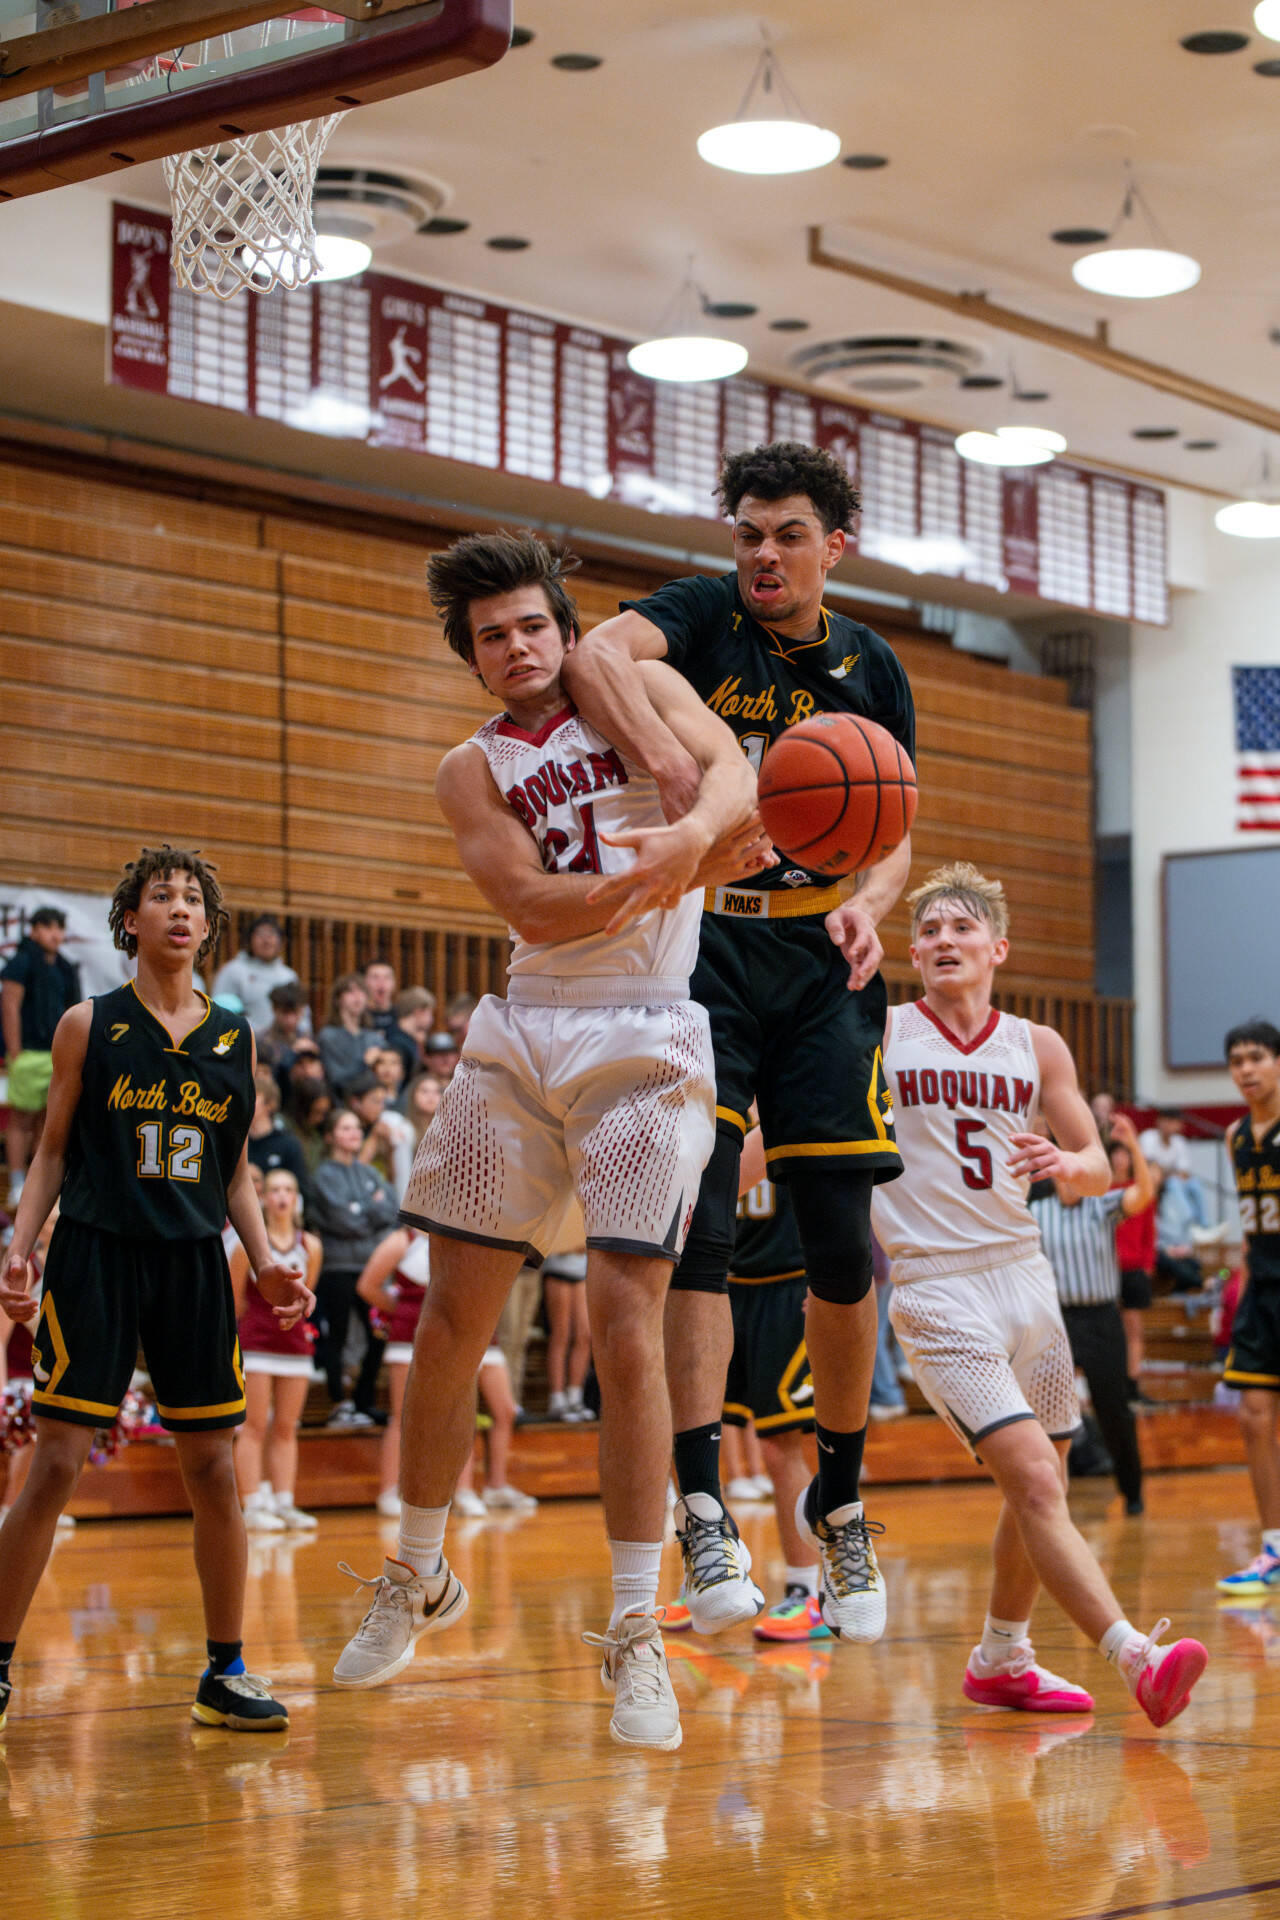 PHOTO BY FOREST WORGUM Hoquiam guard Lincoln Niemi, left, collides with North Beach’s Tyrell Hovland during the Grizzlies’ 71-31 victory on Thursday at Hoquiam Square Garden.